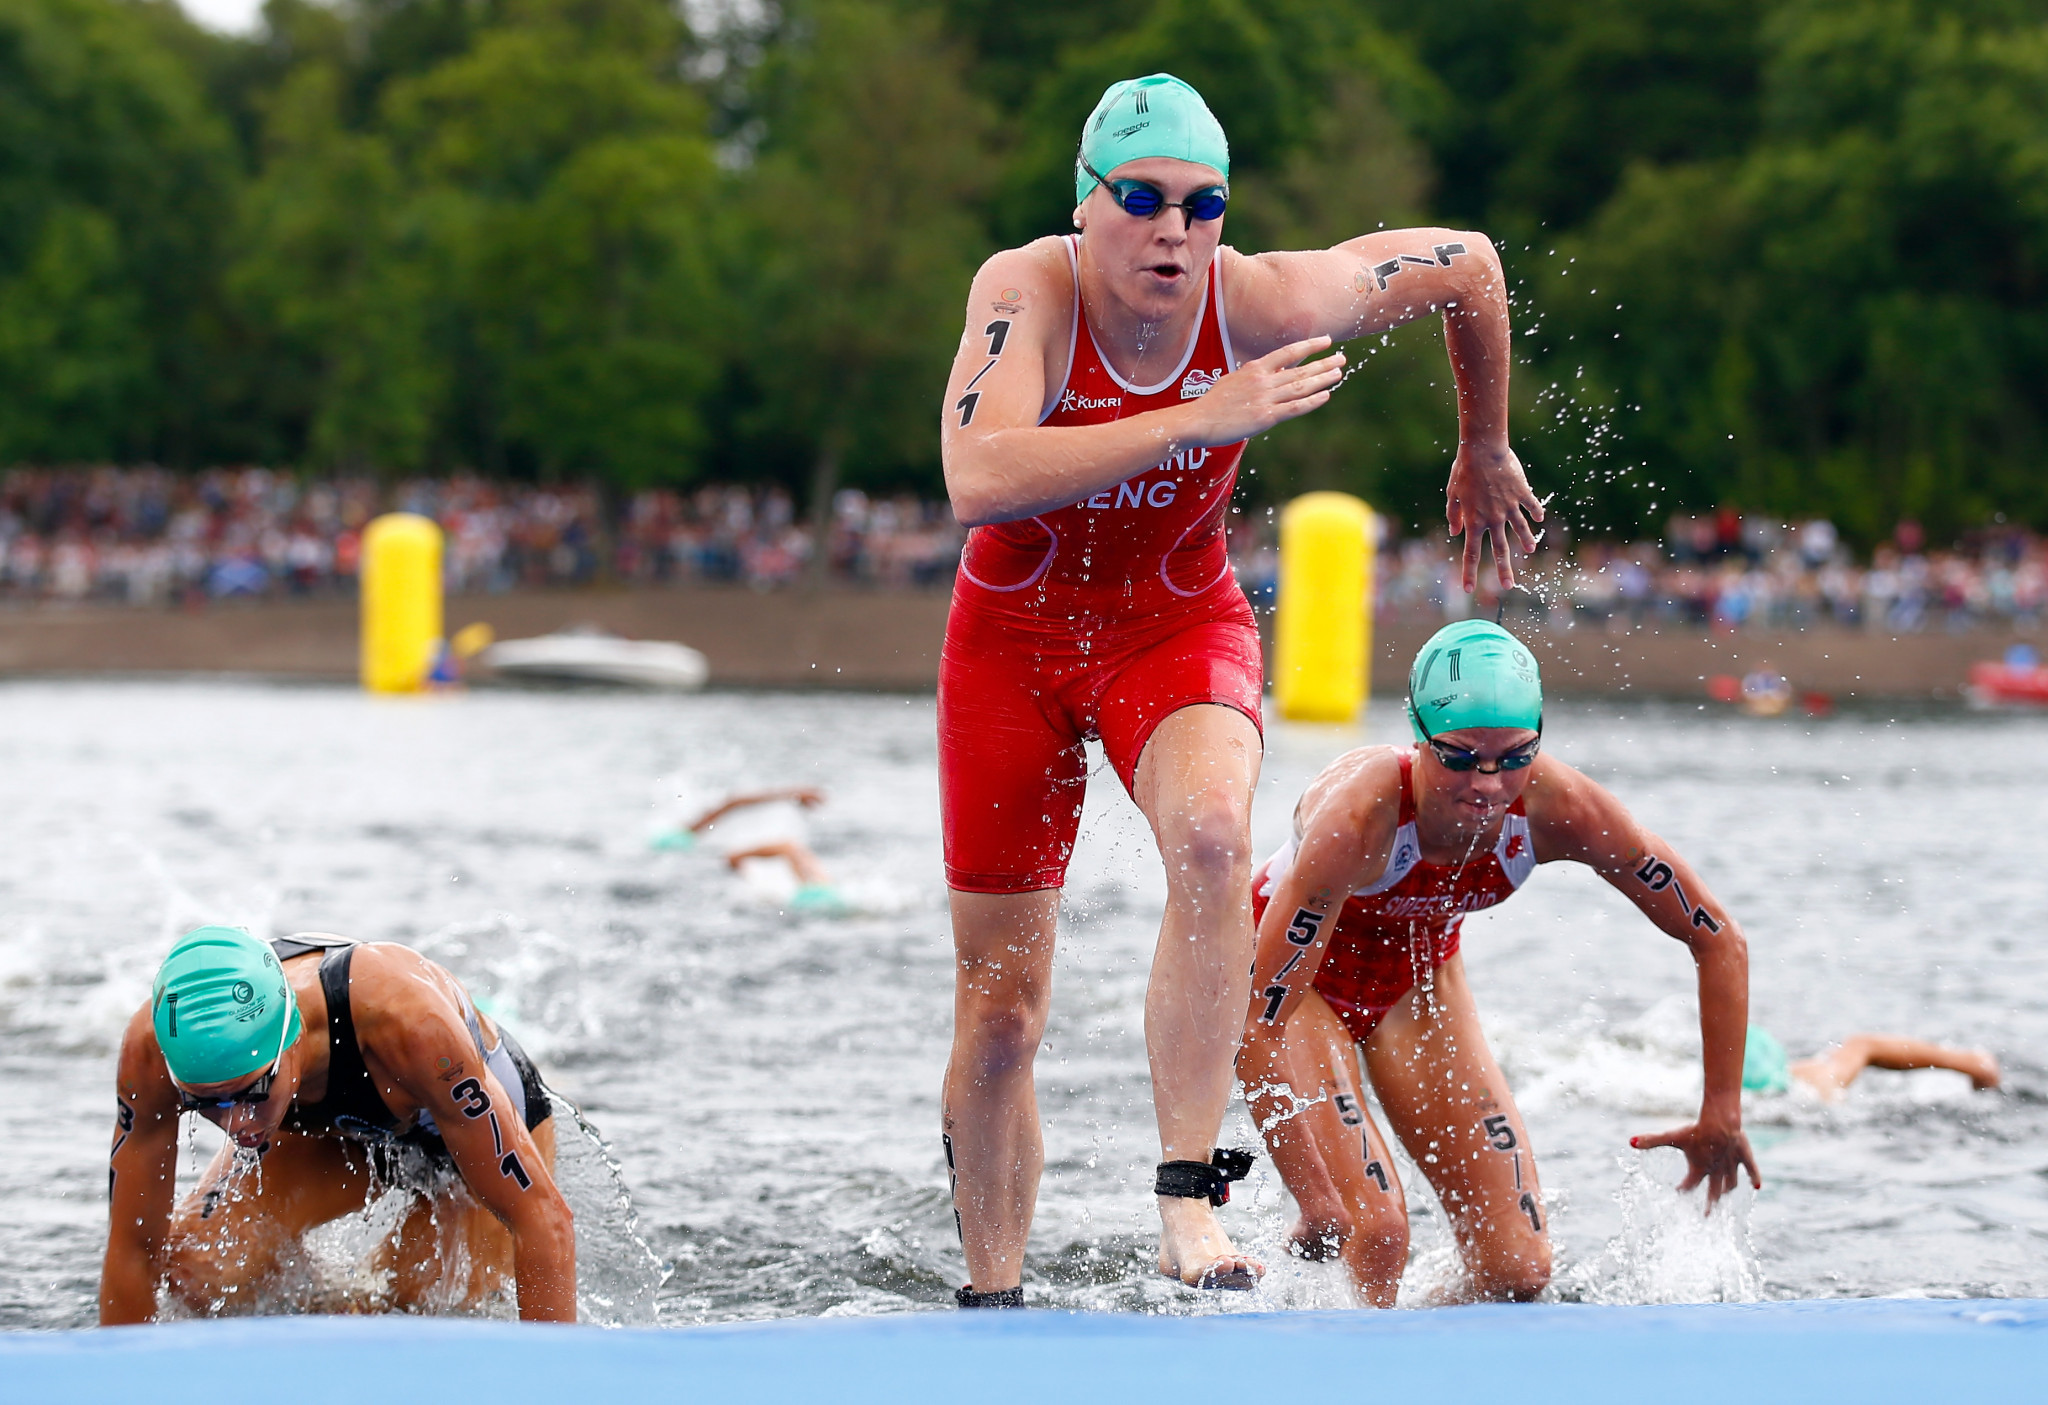 Triathlon will also be part of the Glasgow 2018 European Championships ©Getty Images